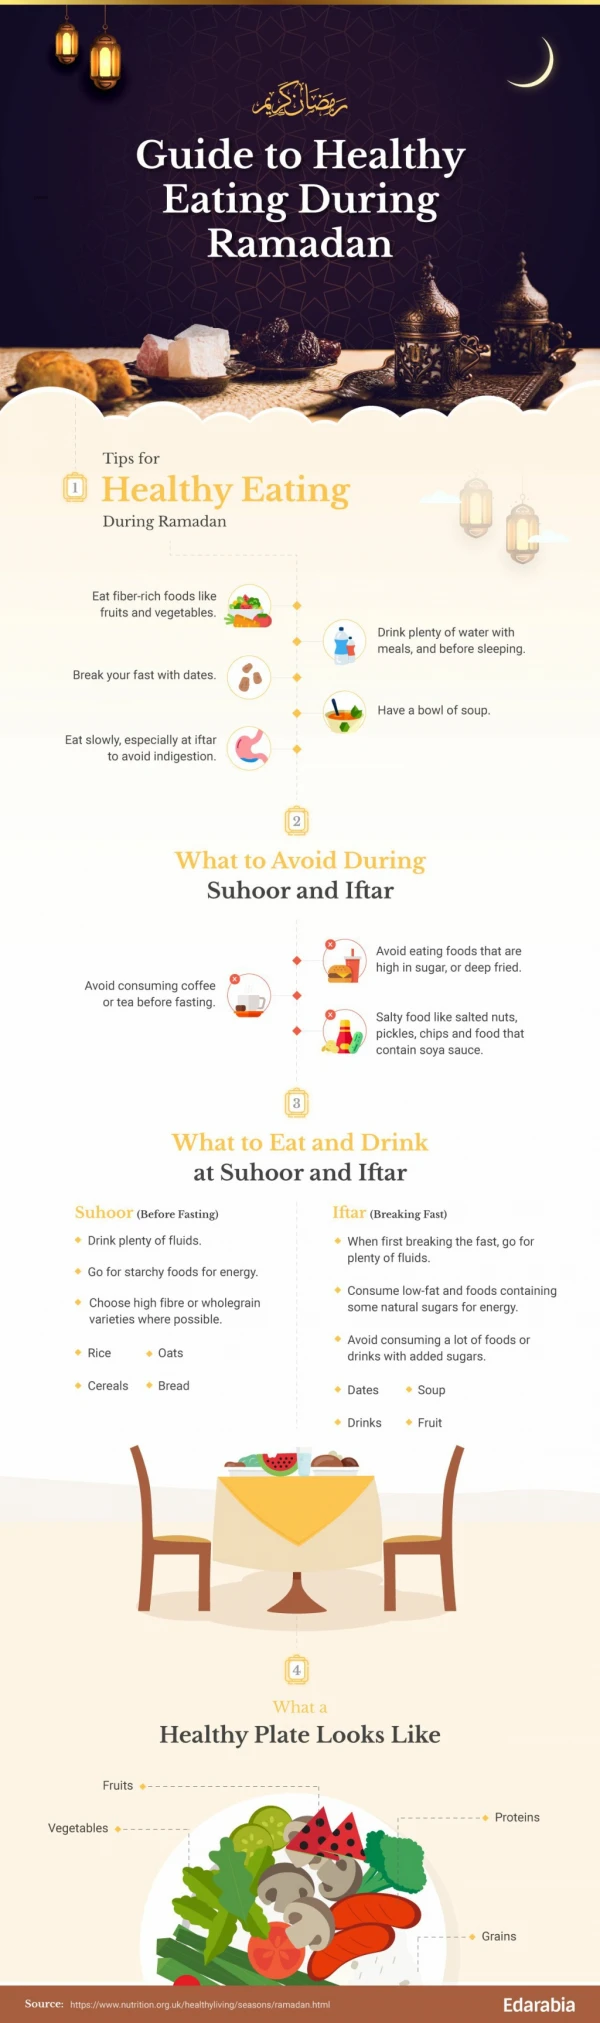 Guide to Healthy Eating During Ramadan